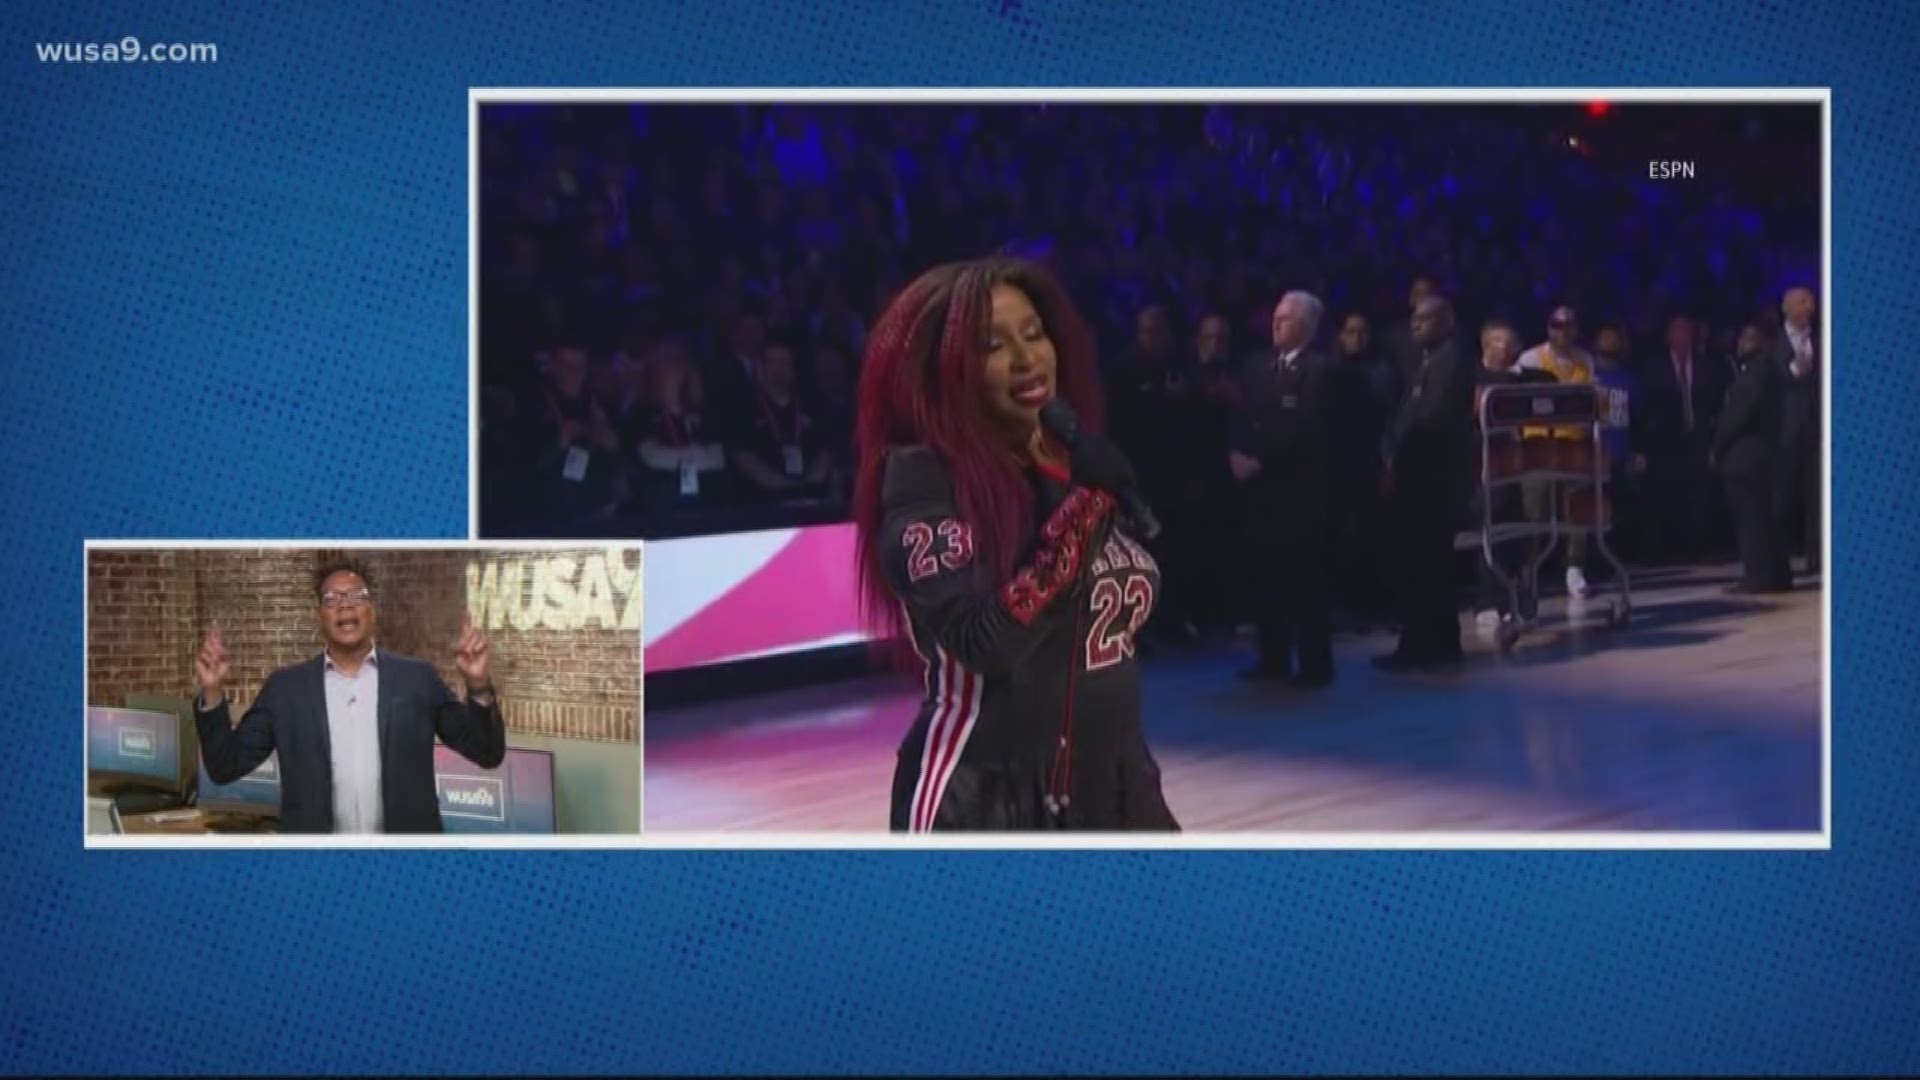 Chaka Khan's National Anthem performance at the NBA All-Star Game was compared to Fergie's performance last year. This is In Other New.